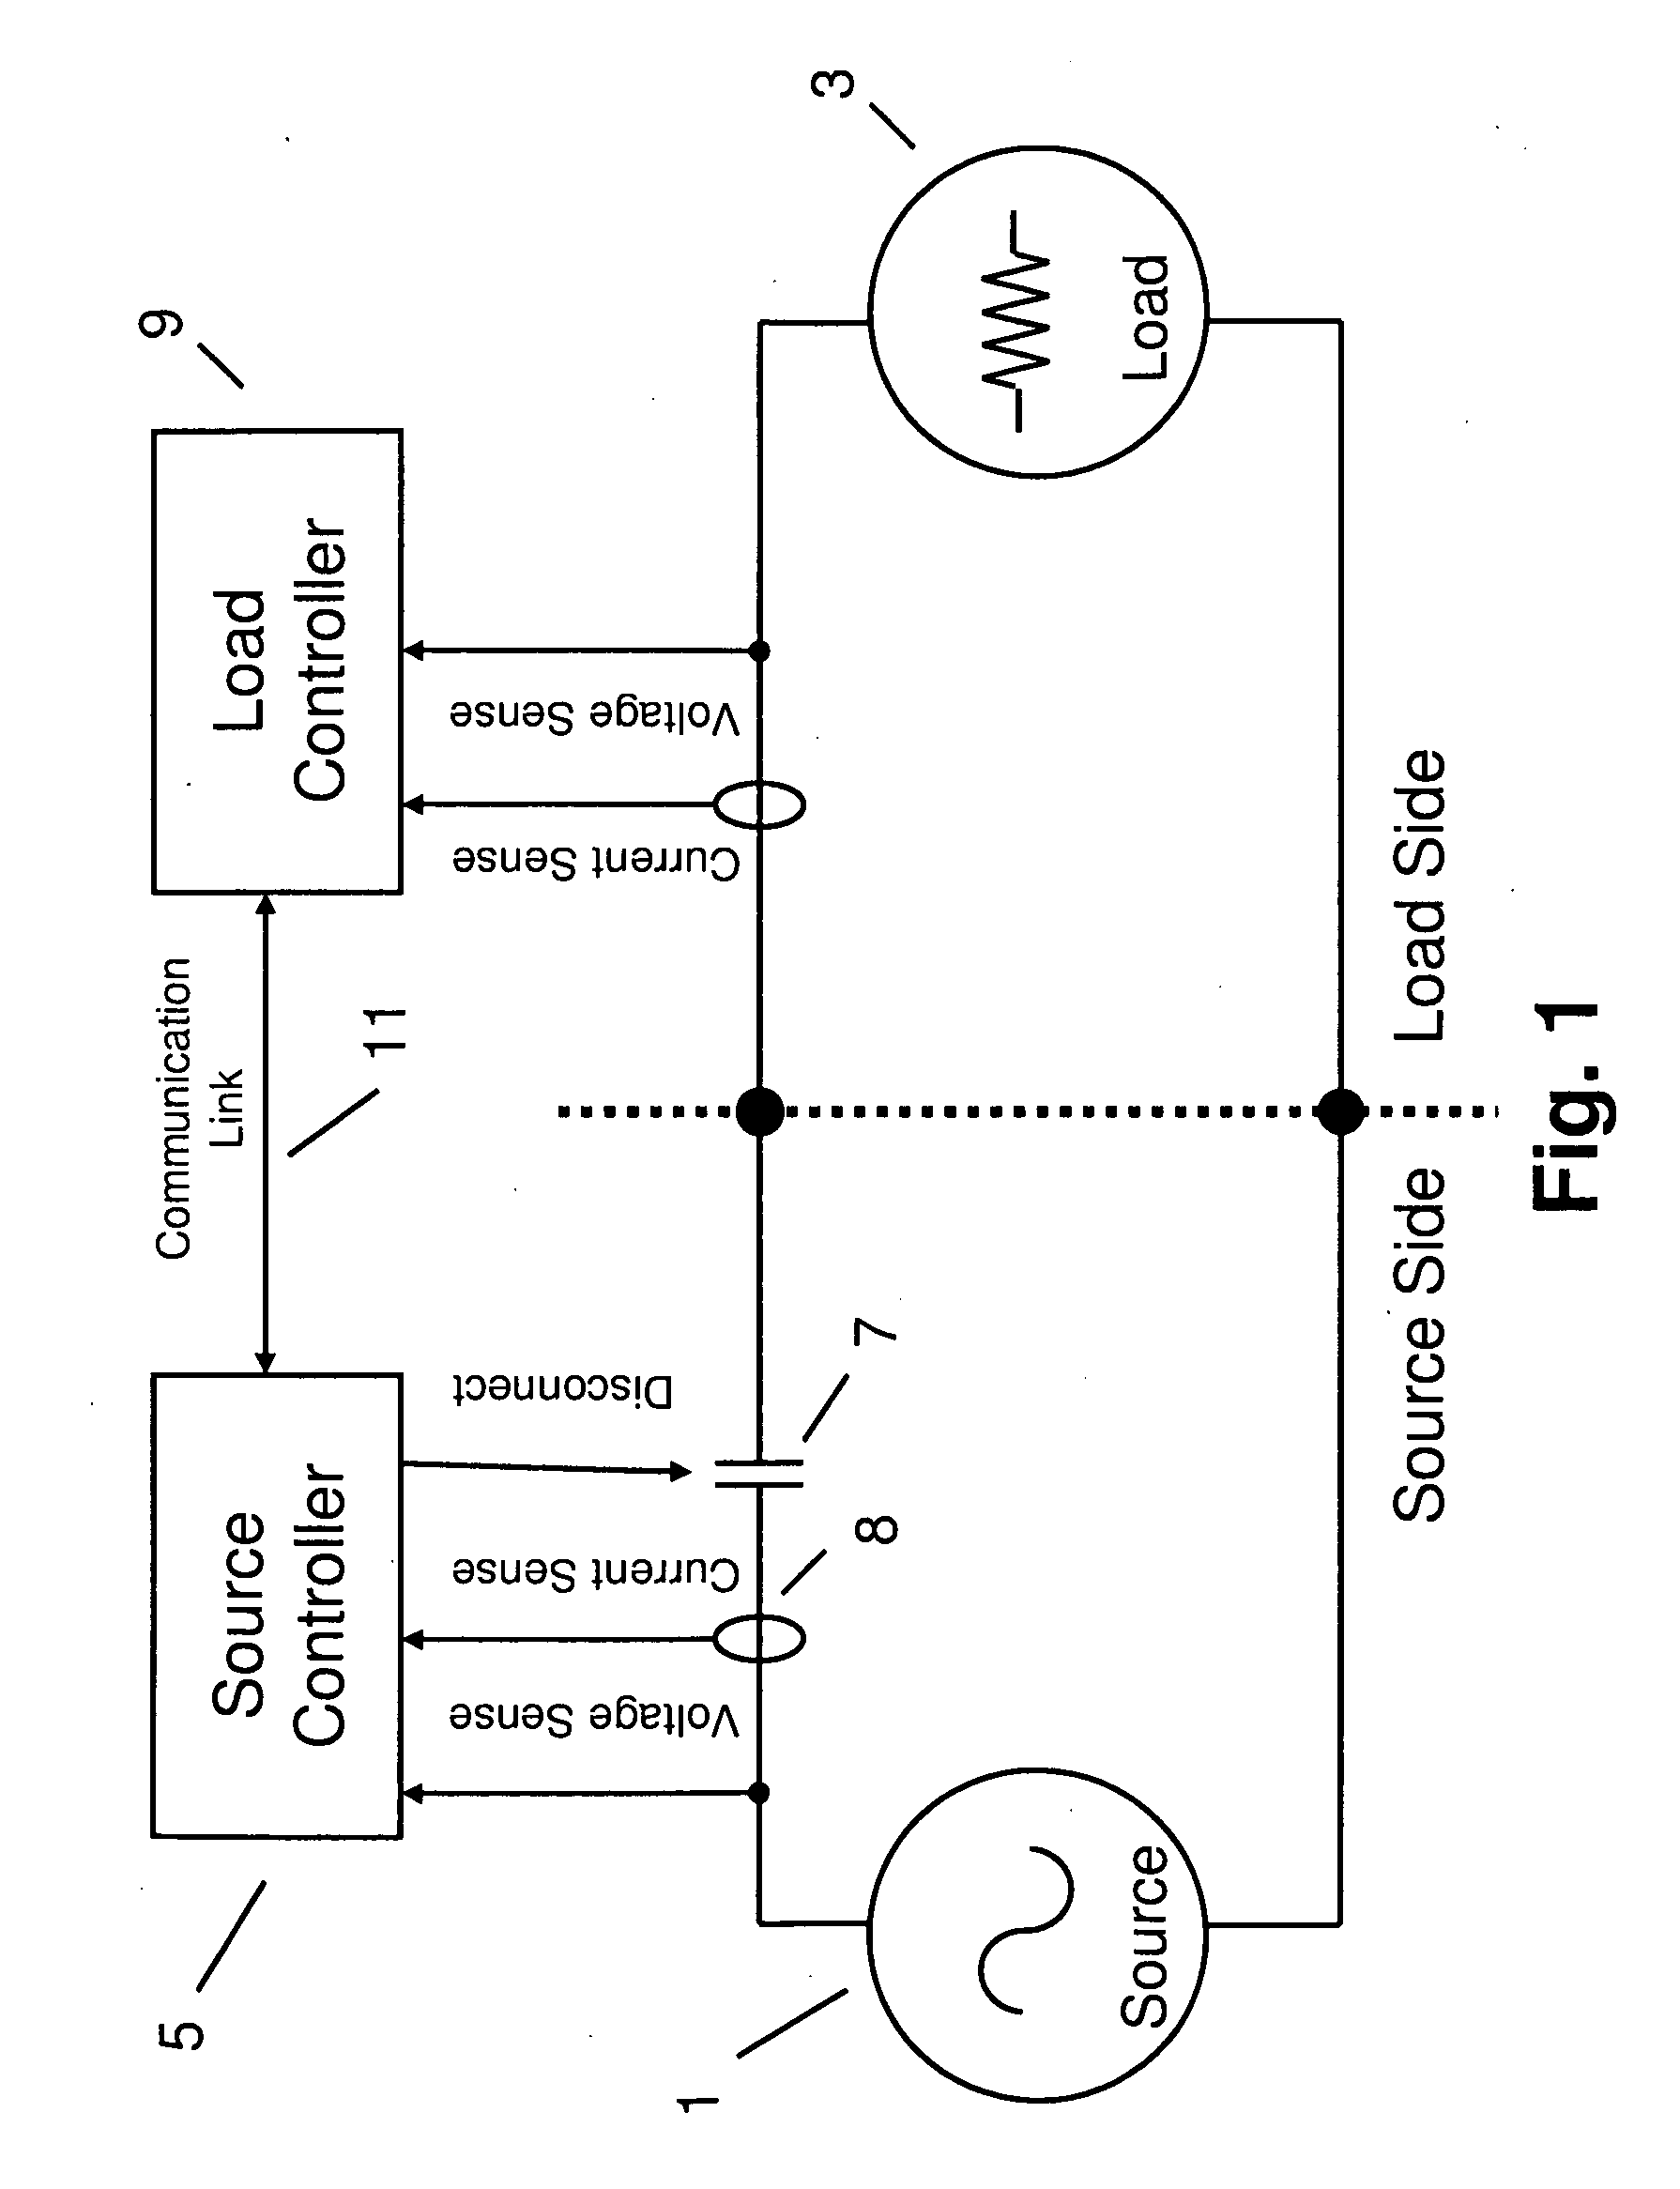 Power Distribution System with Fault Protection Using Energy Packet Confirmation